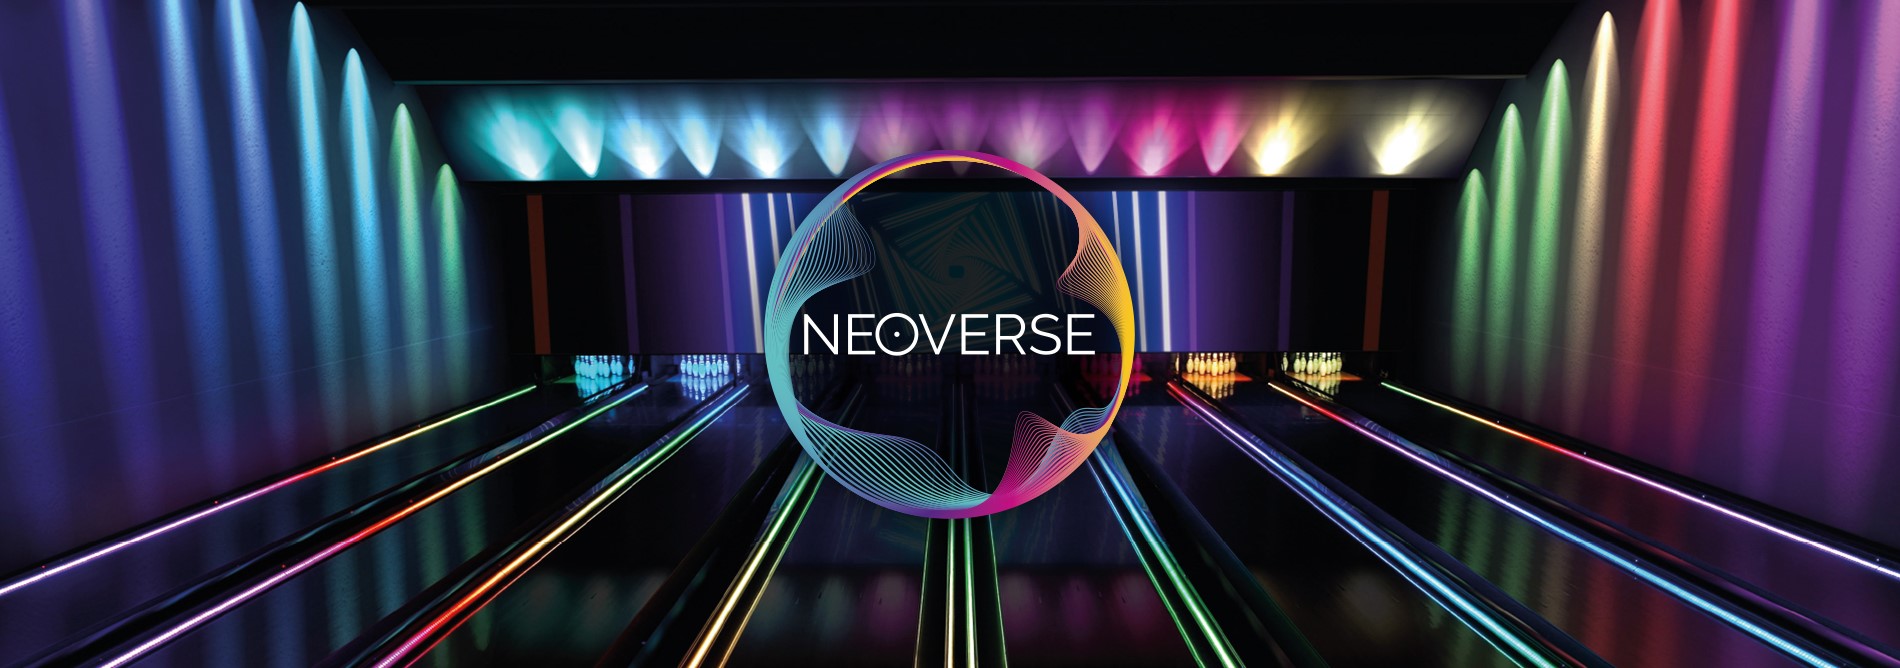 The neoverse QubicaAMF LED wall technology home banner